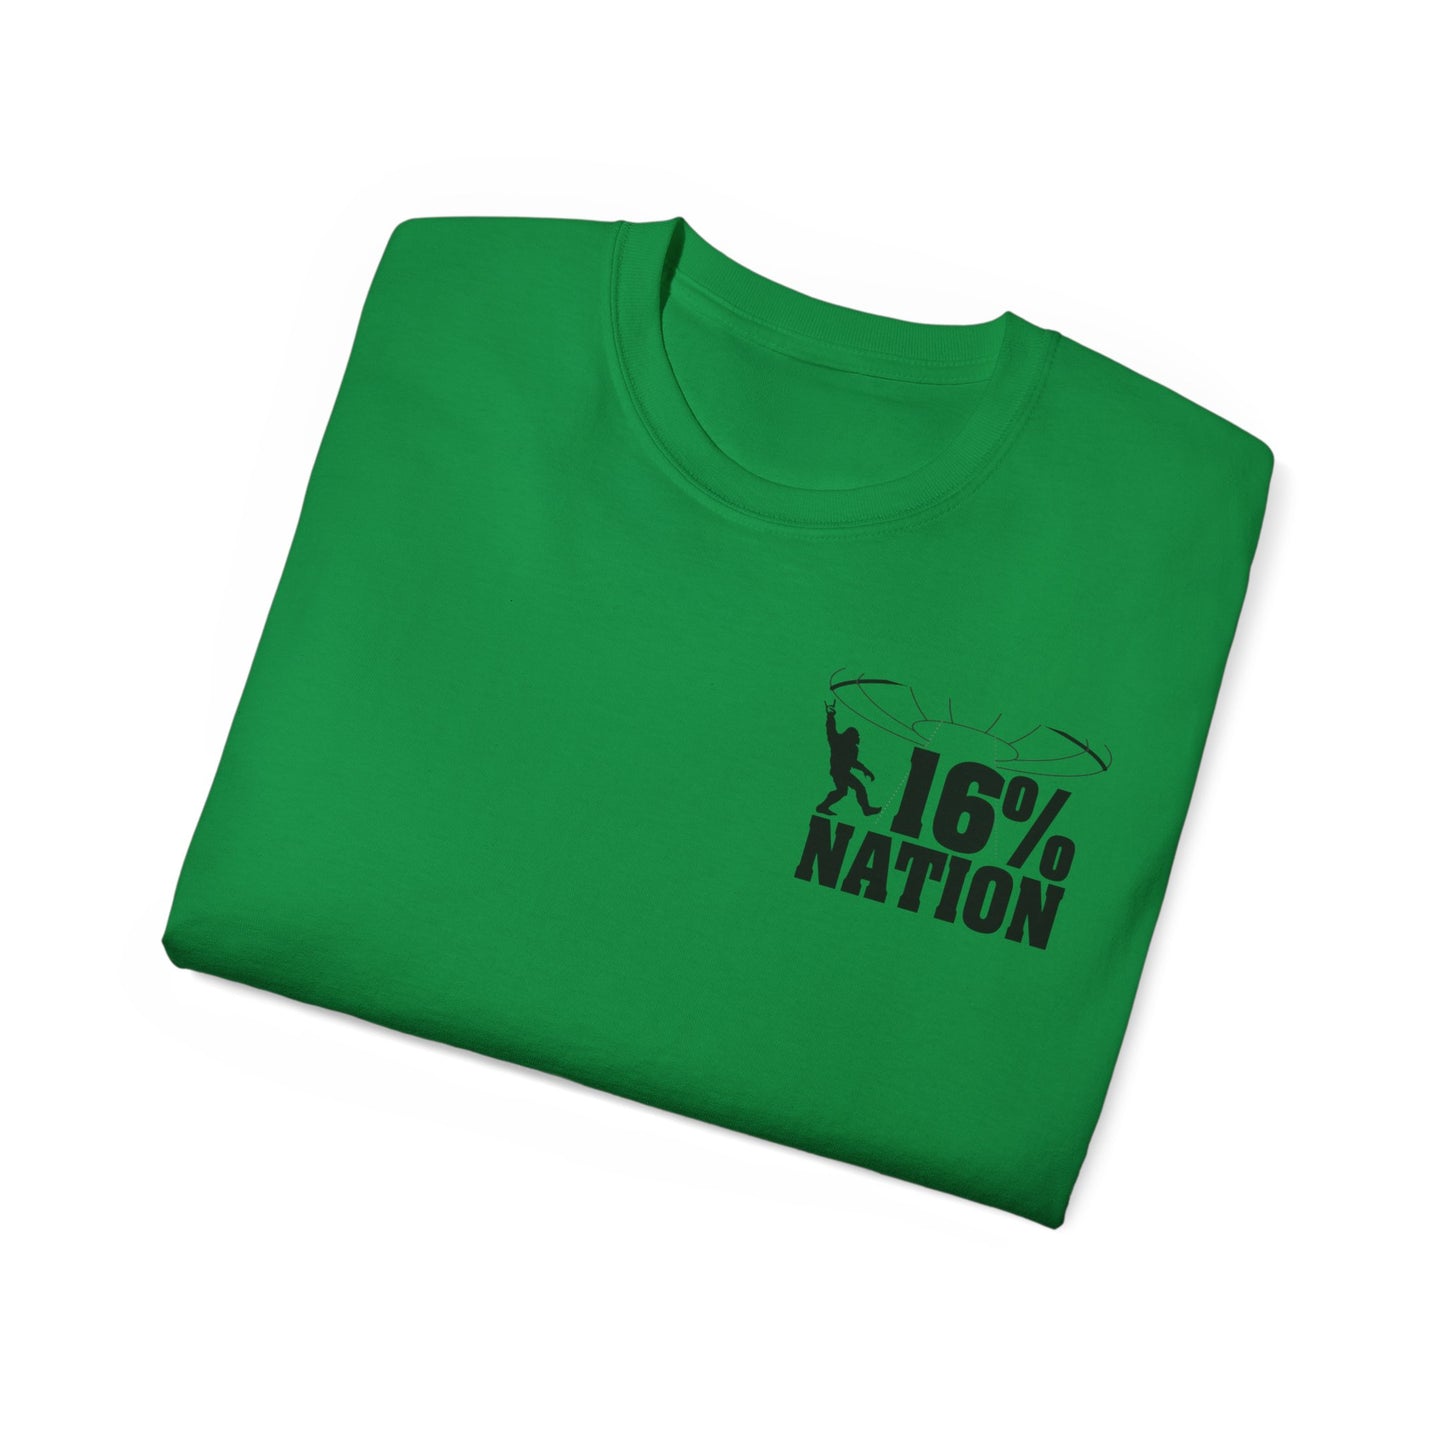 16% Nation Cryptid Research Team T-shirt